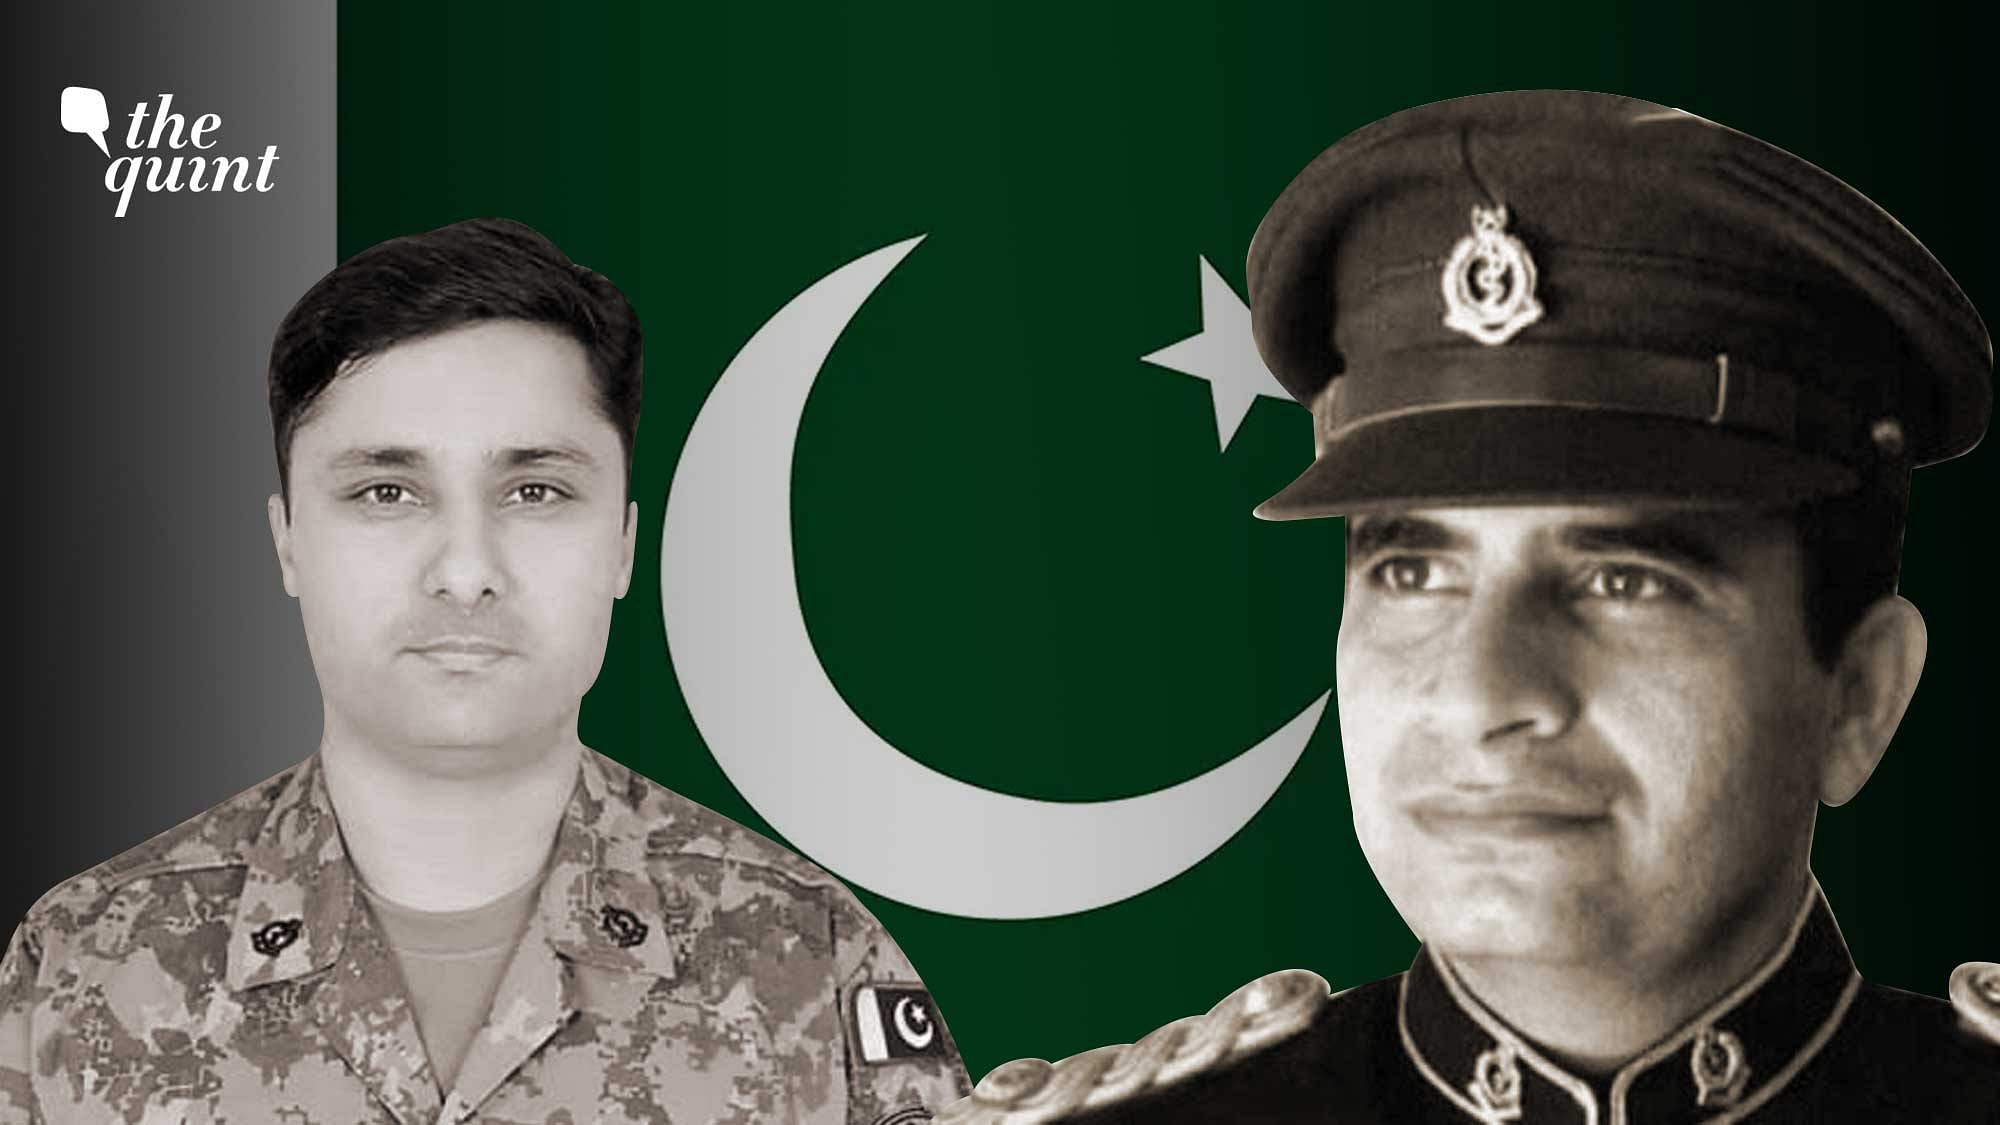 <div class="paragraphs"><p>According to Pakistani media, Dr Kailash Kumar and Dr Anil Kumar became the first Hindu majors in the Pakistan Army in 2019.</p></div>